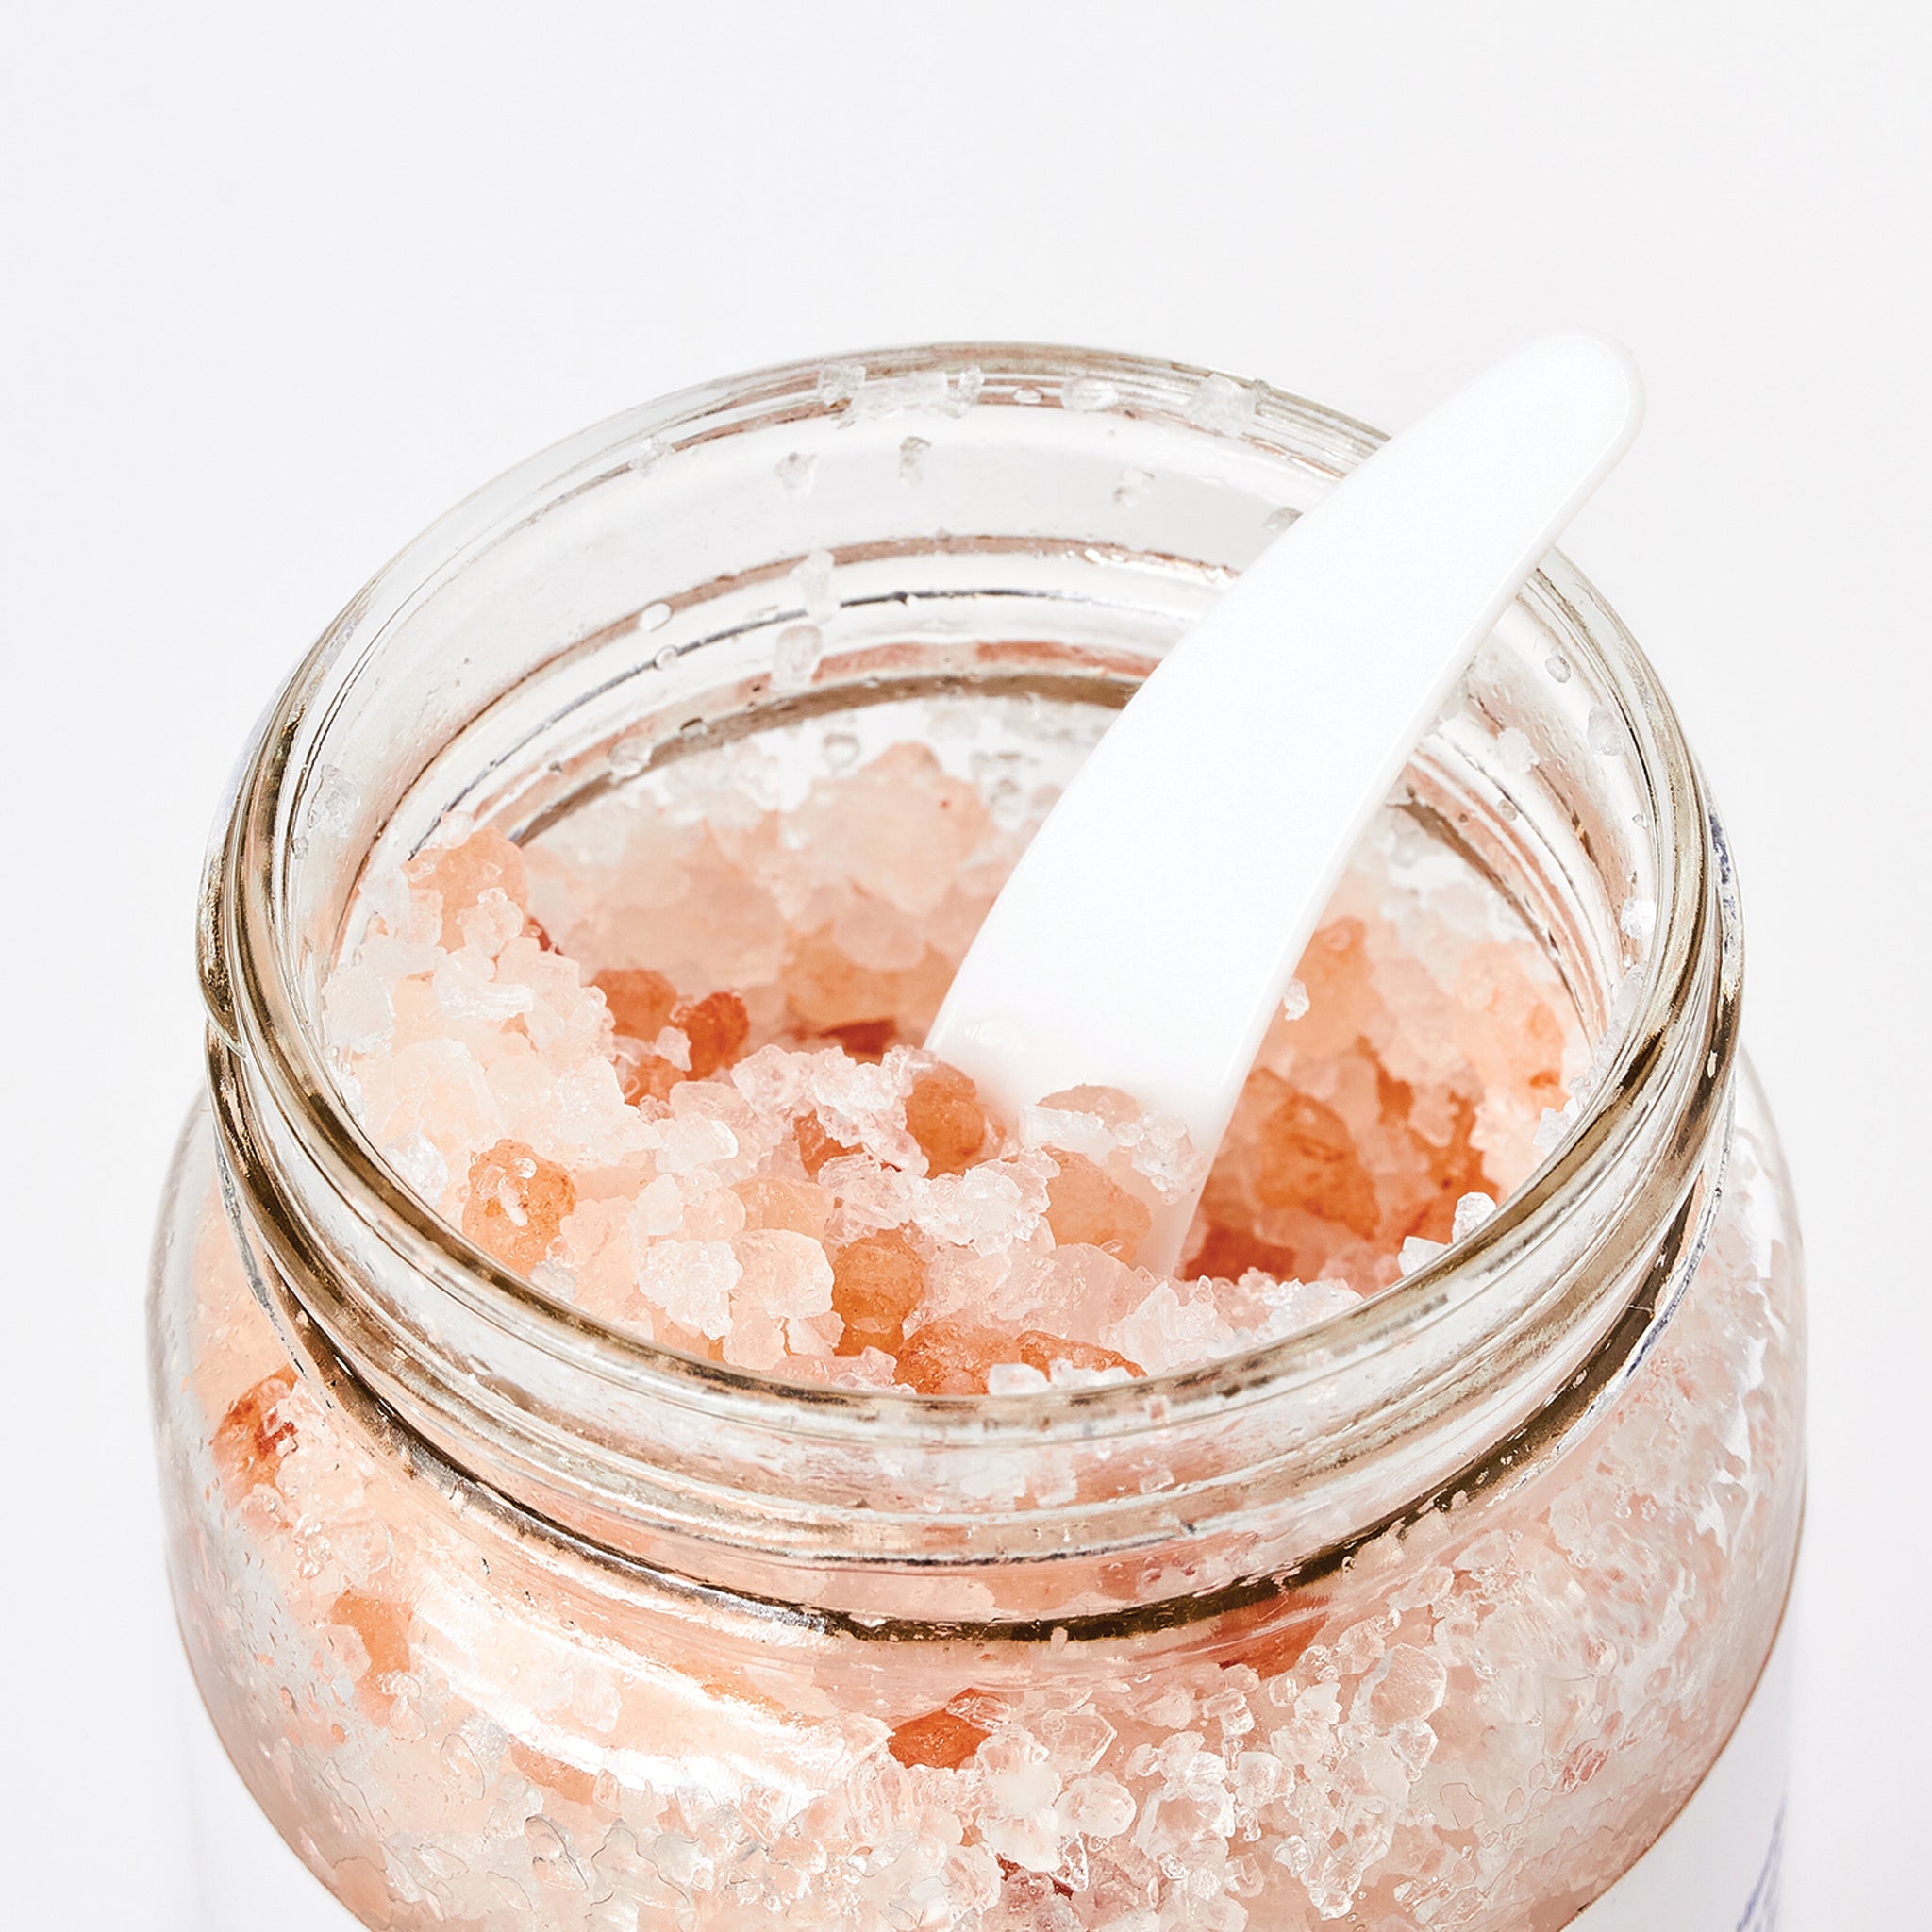 Muscle Relief Bath Salt Soak. Rejuvenate & replenish the body & mind with mineral-rich salts to relax & destress the body.